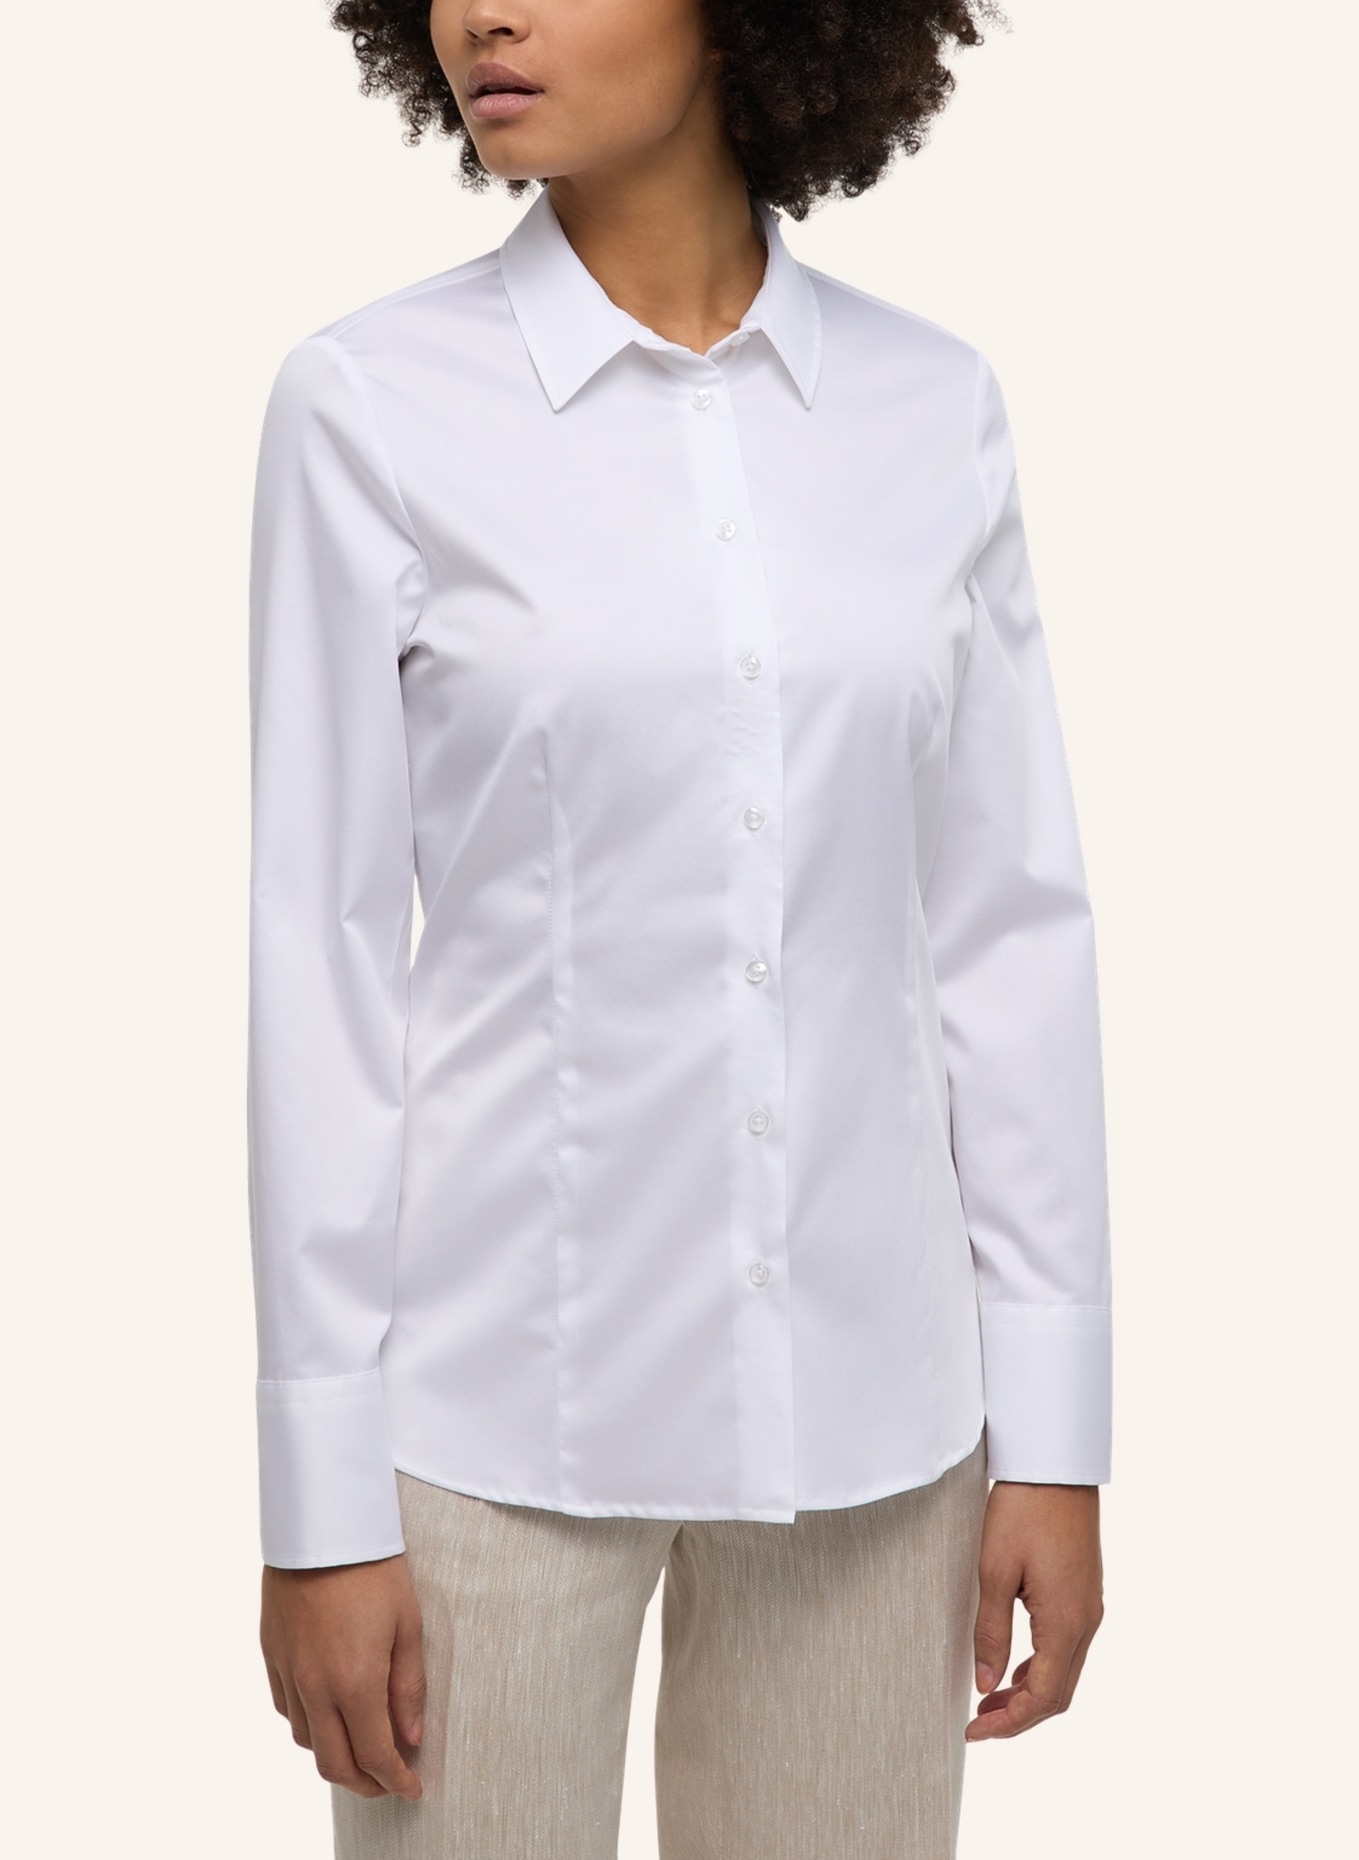 FITTED weiss ETERNA Bluse in